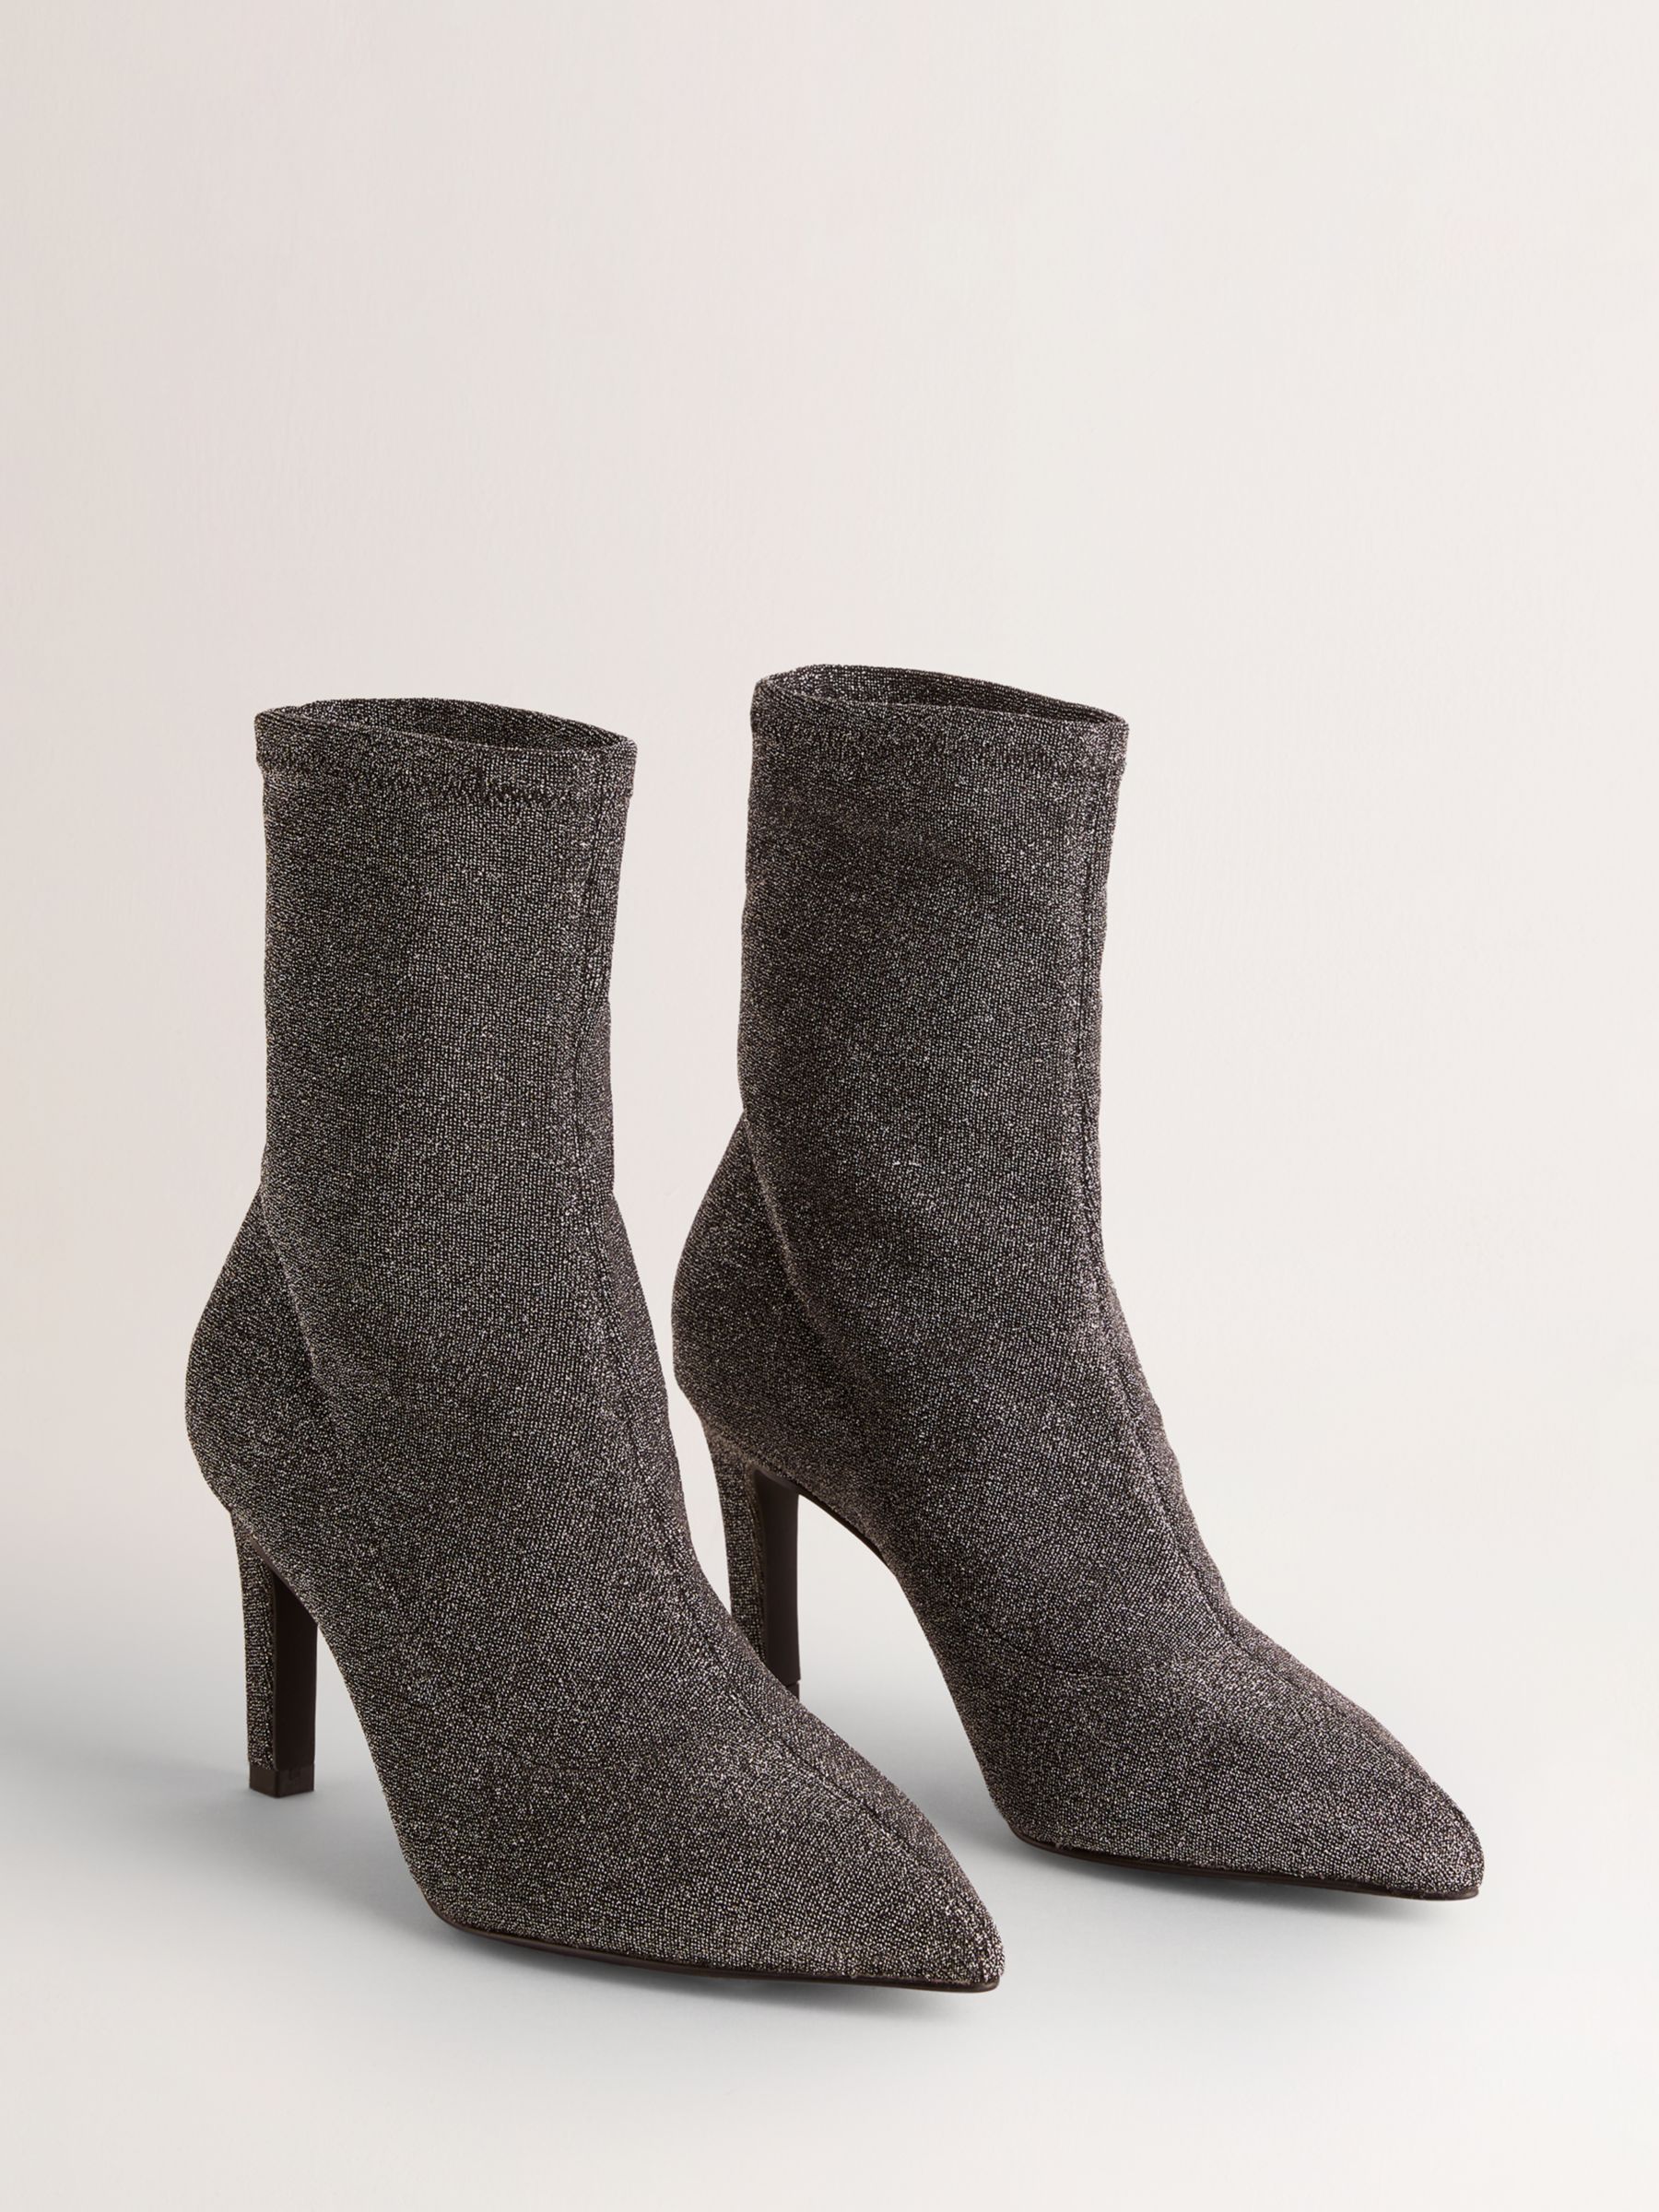 Boden Ankle Stretch Pointed Toe Boots, Gunmetal at John Lewis & Partners